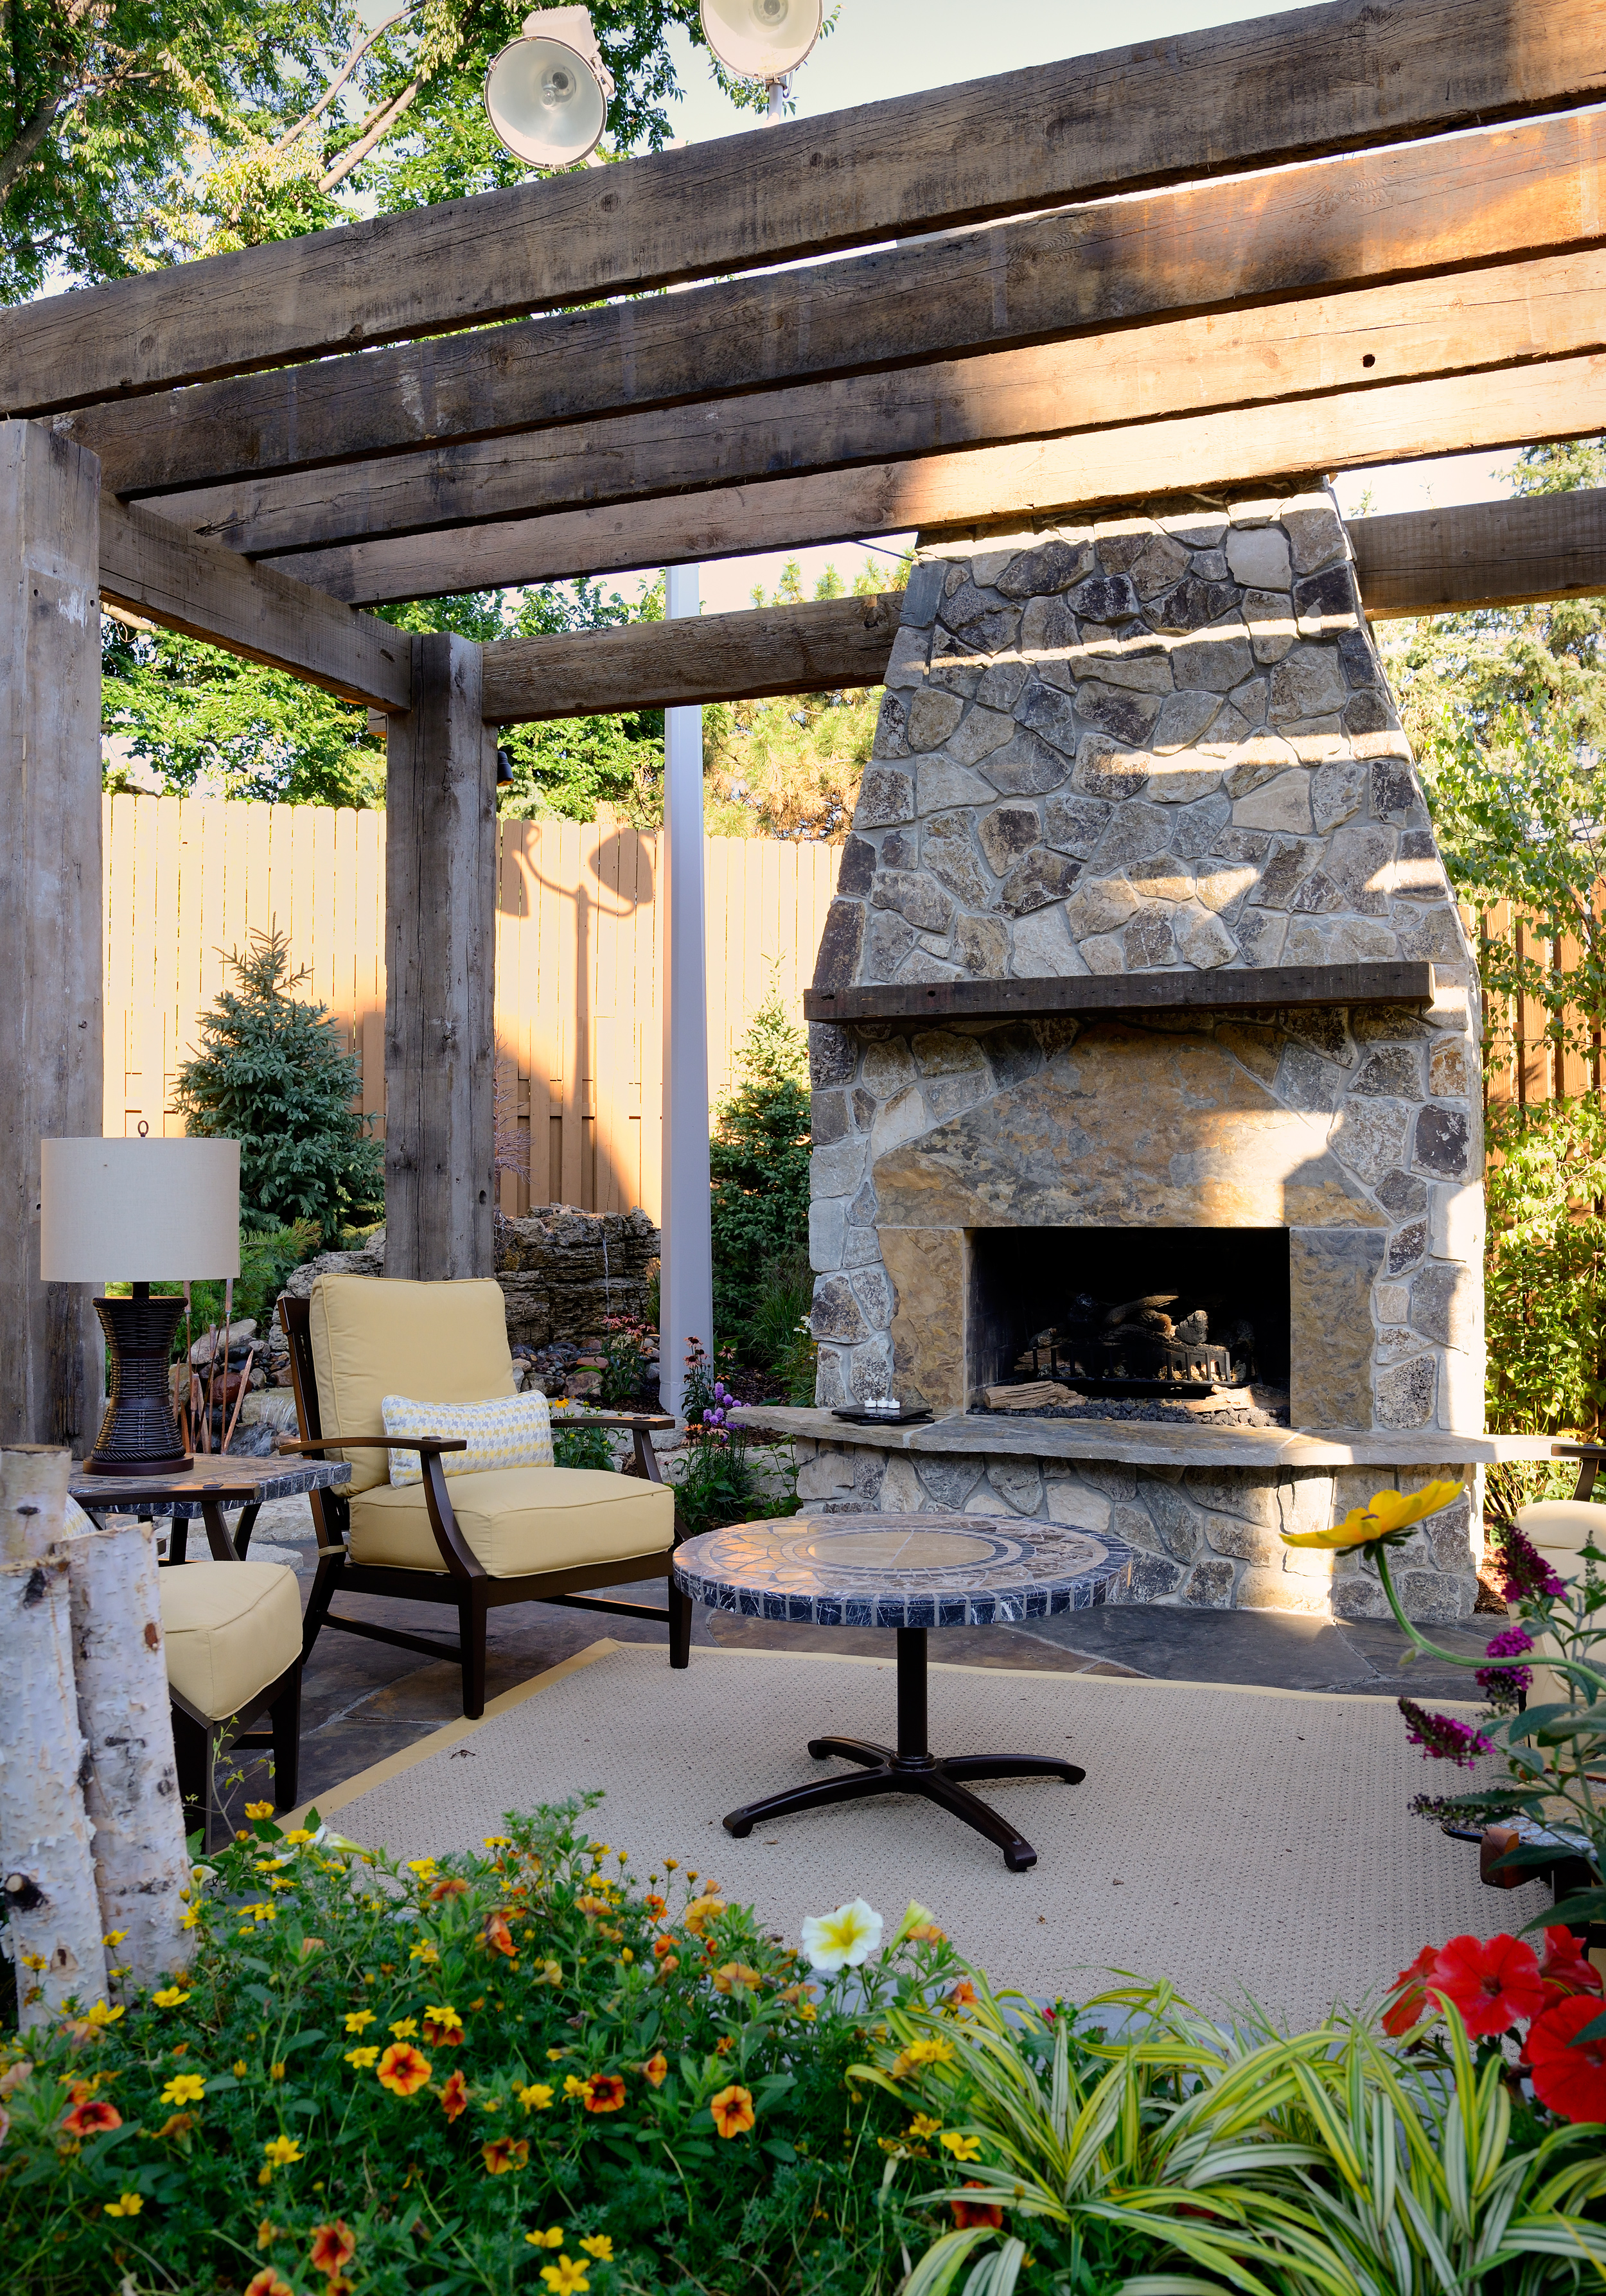 Image for Fall 2014 Parade of Homes Features Outdoor Living